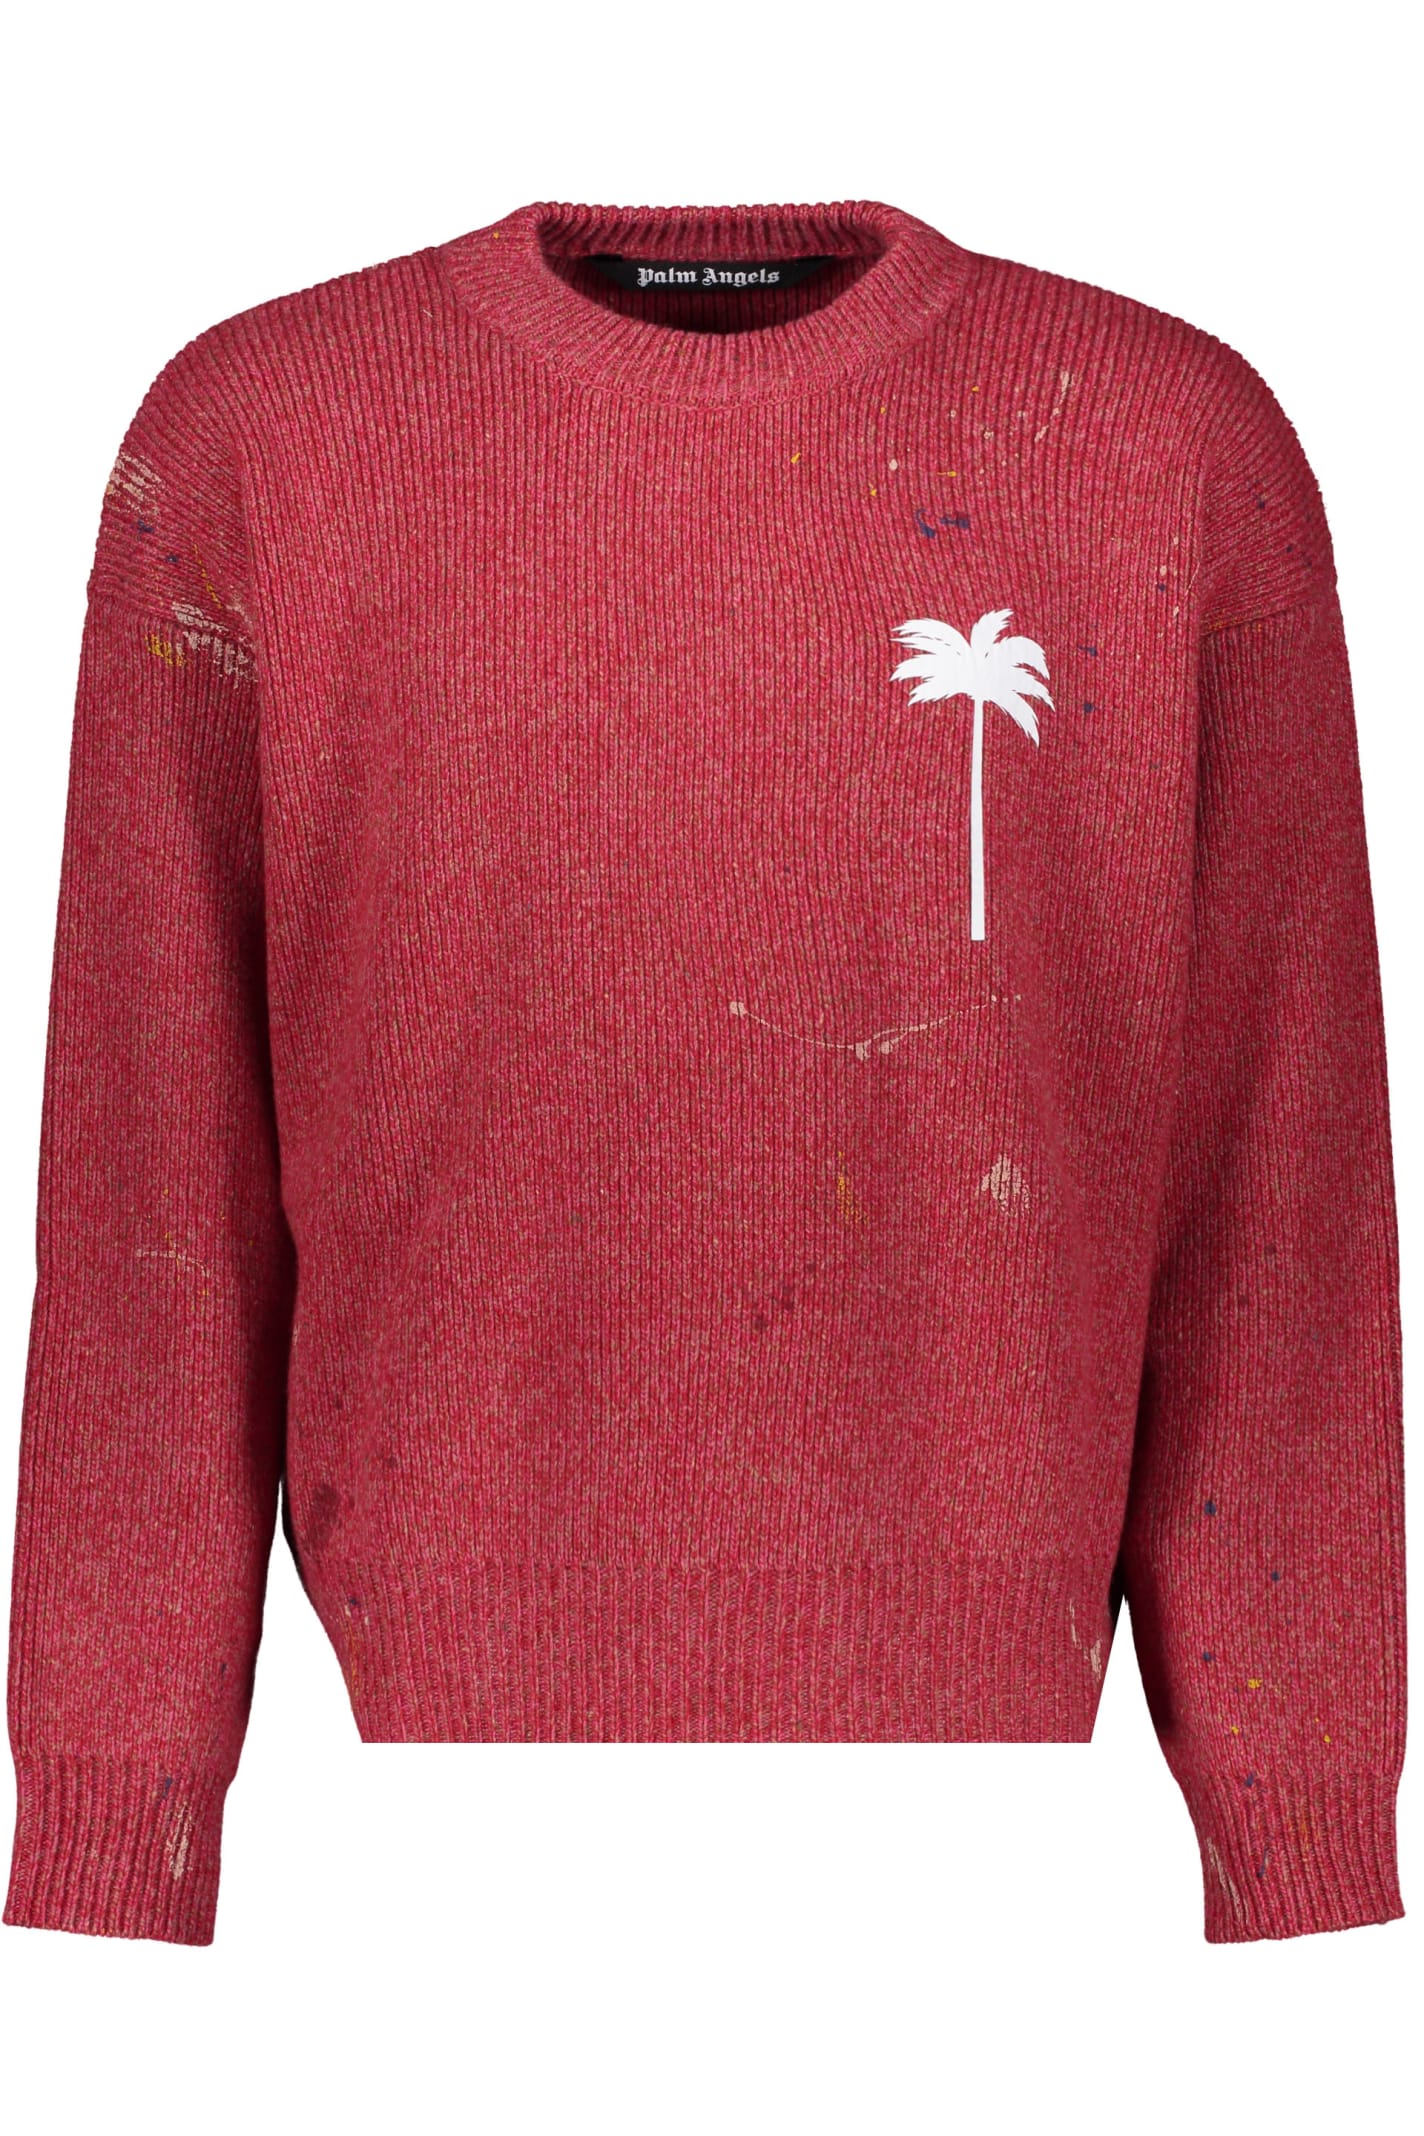 Palm Angels Long Sleeve Crew-neck Jumper In Red